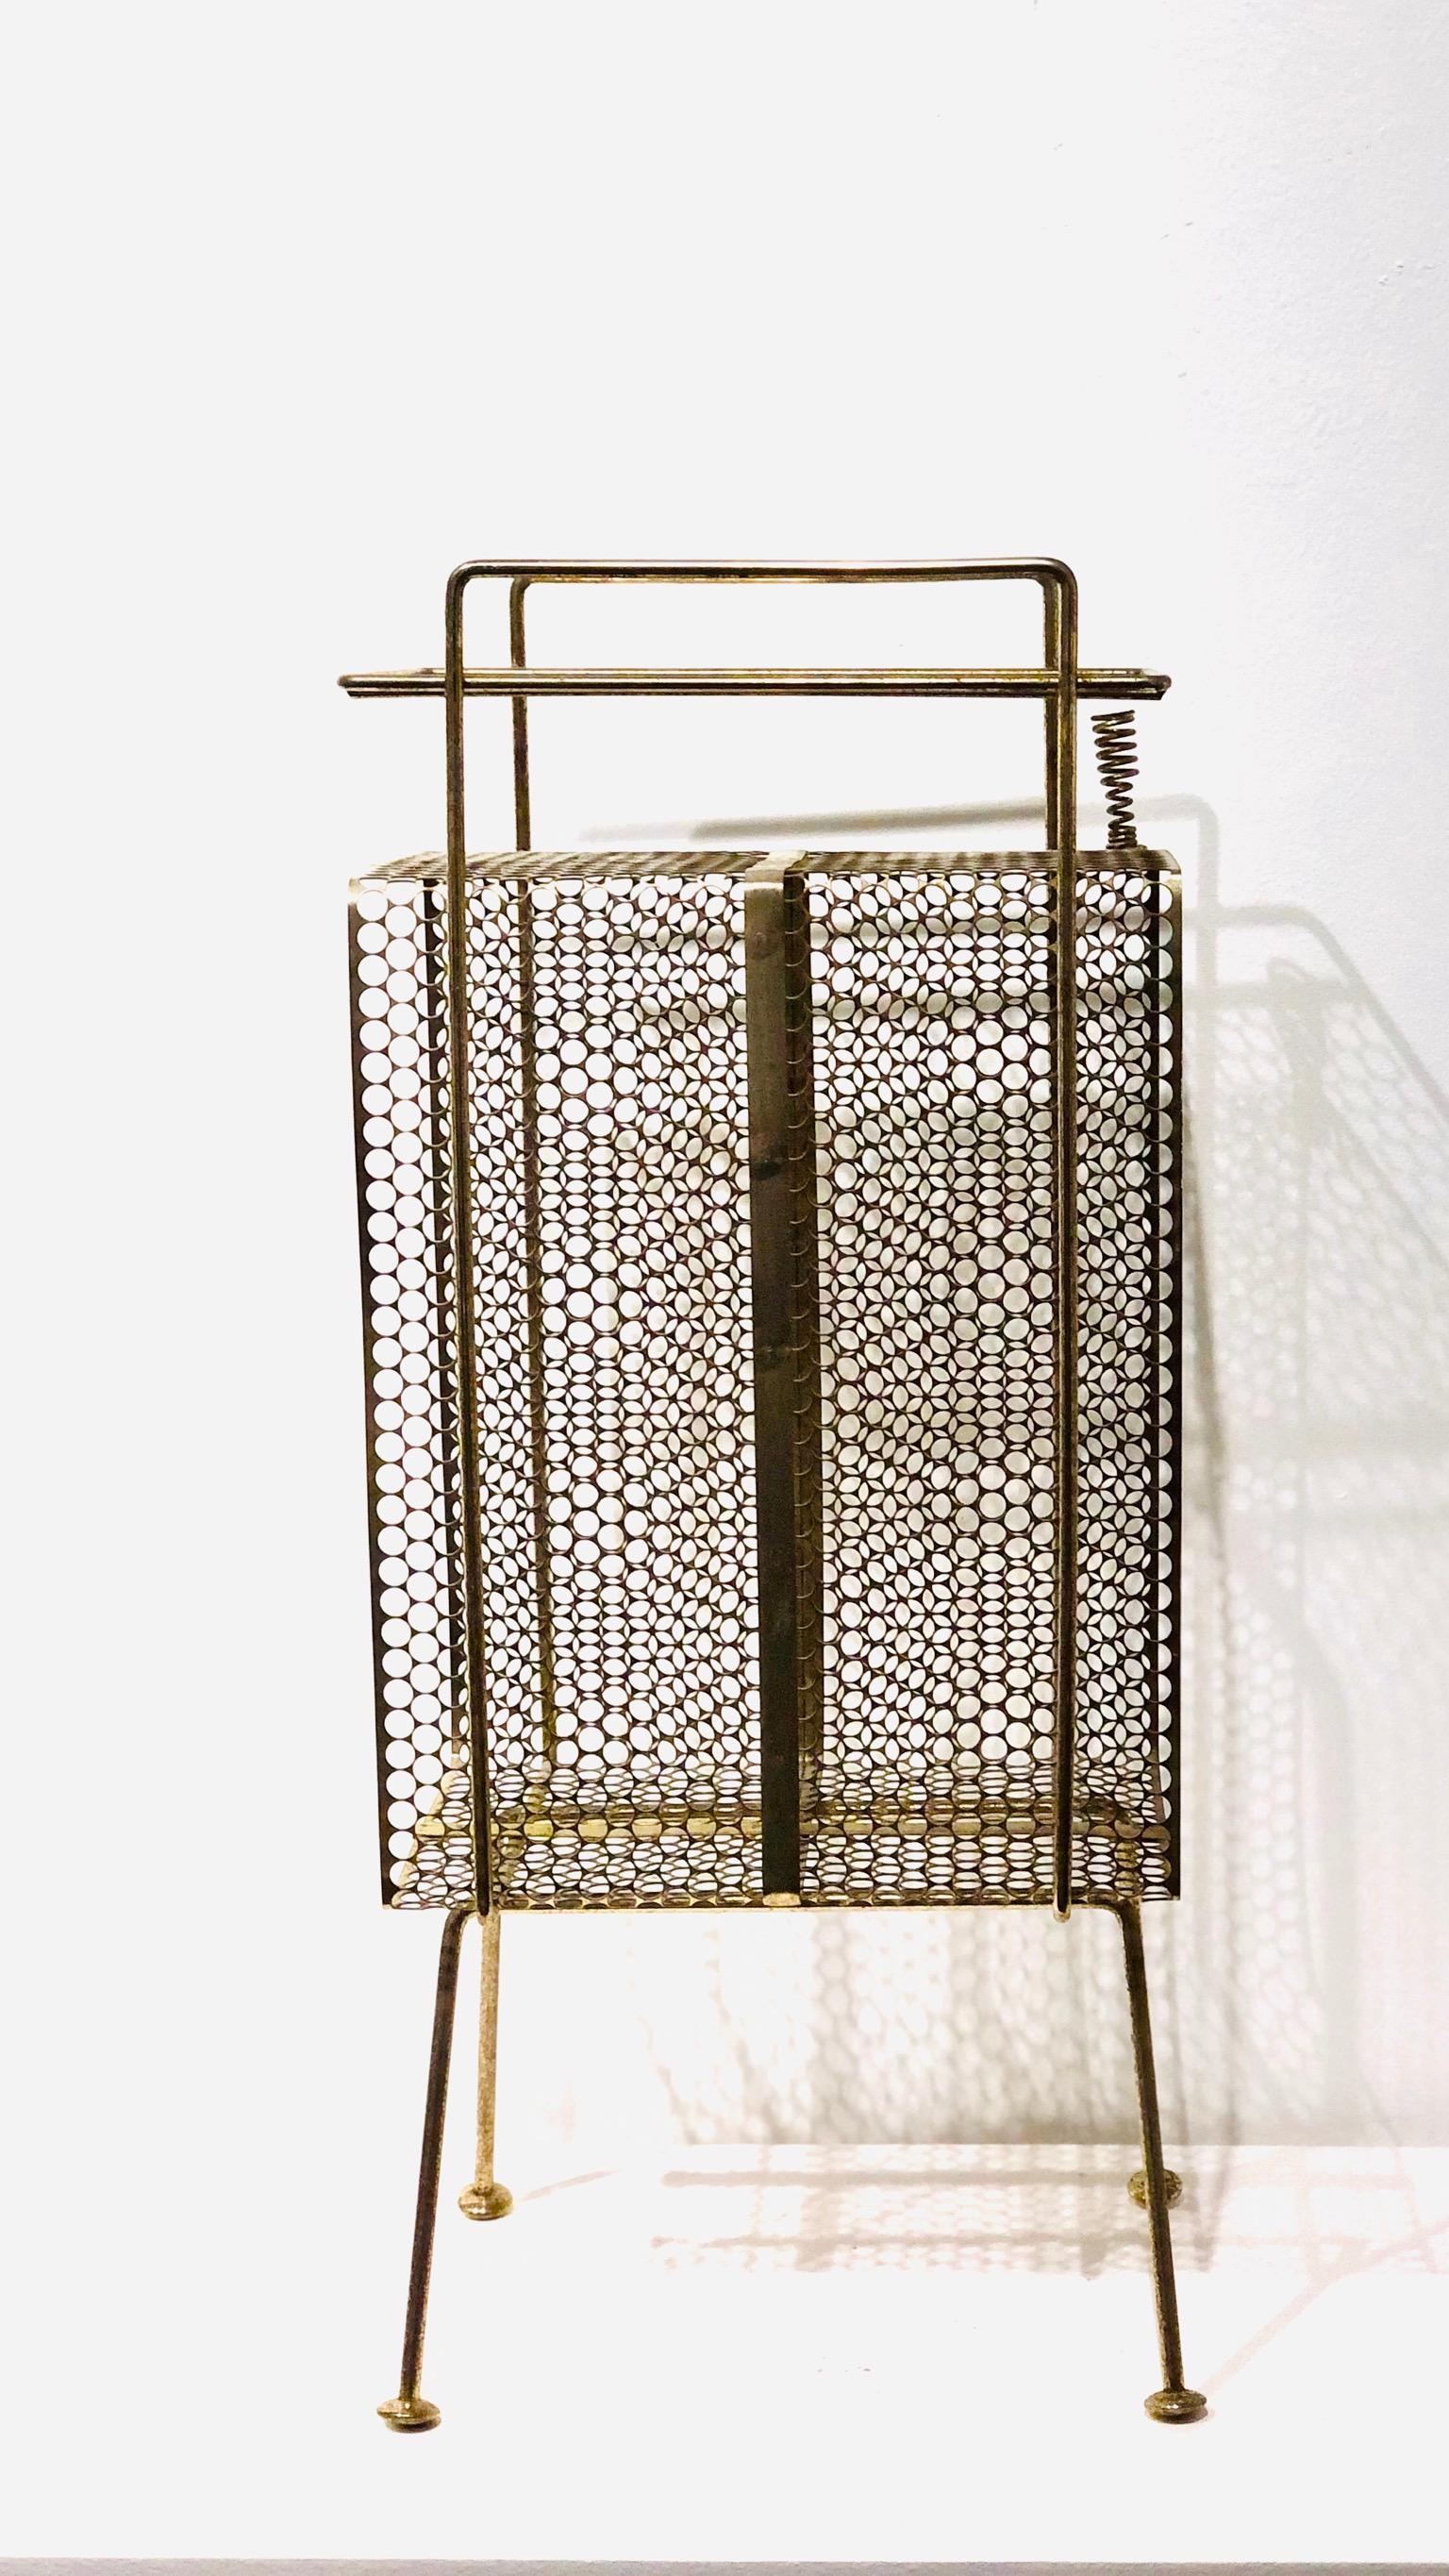 The 1950s Classic midcentury, atomic age era stand/rack original used for the telephone, pen holder and phone directory, this one its in brass finish with some wear light rust and patina due to age. Designed by Richard Galef for Ravenware.